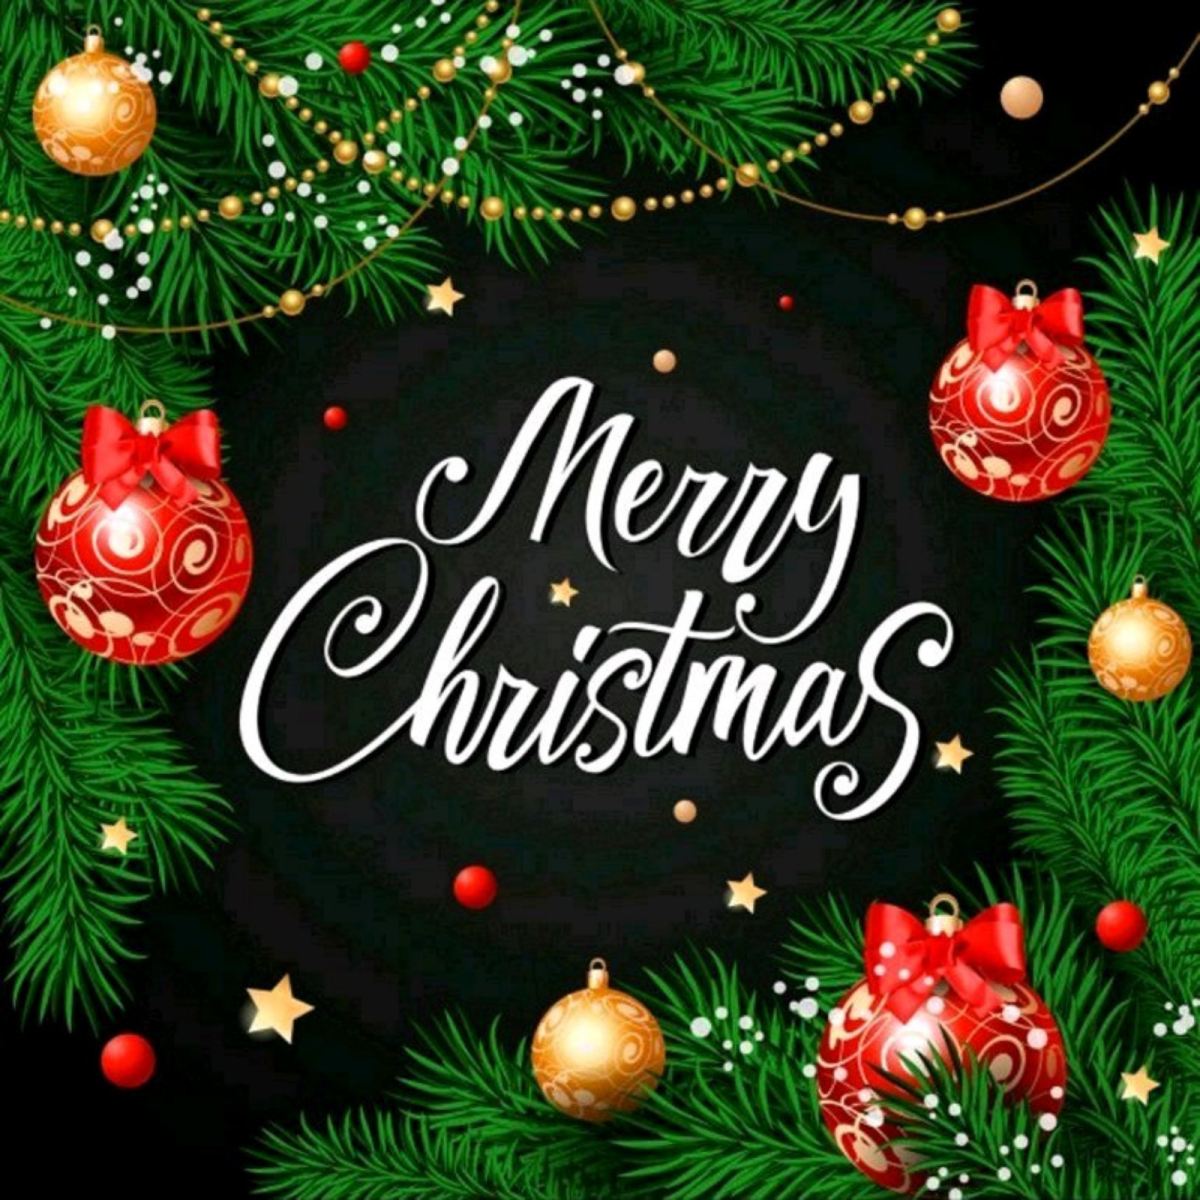 Dear valued customers, Pusat Perabot Impian wish you and your family MERRY CHRISTMAS. 